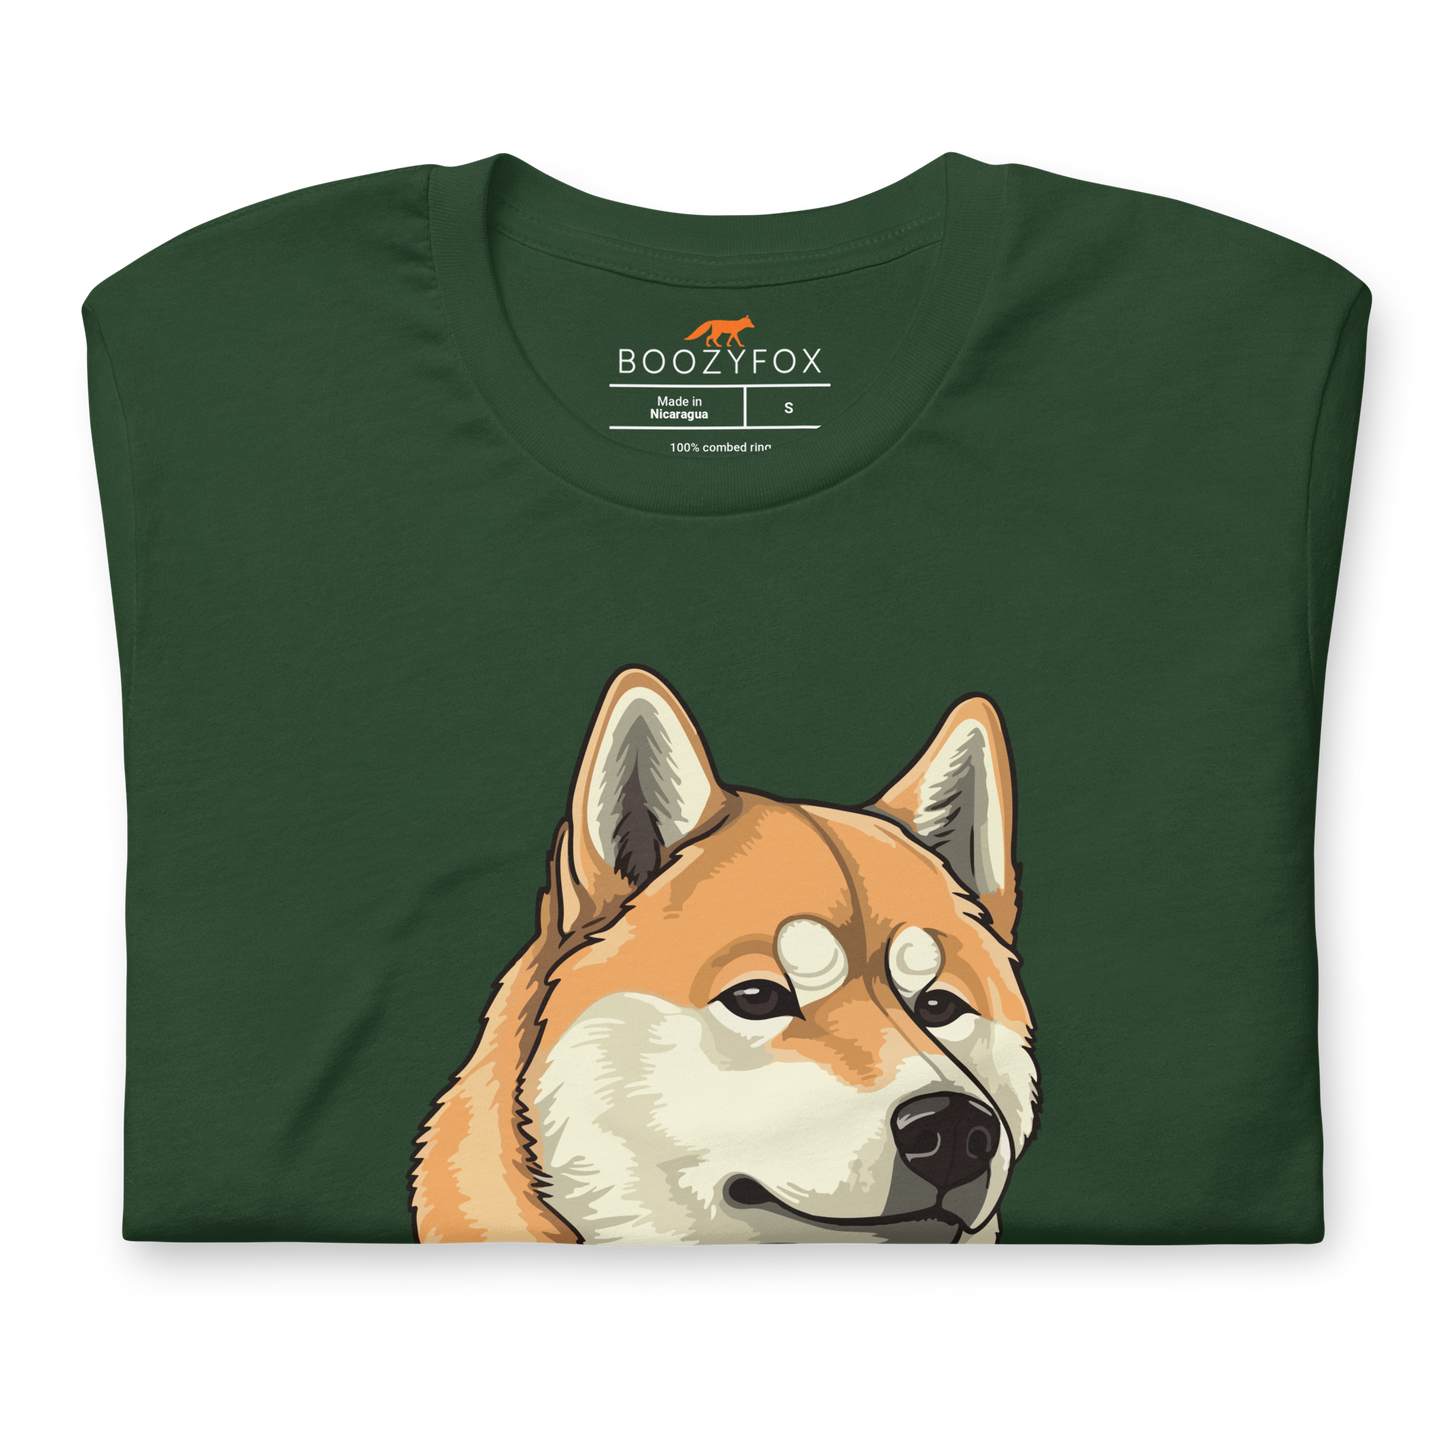 Front details of a Forest Green Premium Shiba Inu T-Shirt featuring the Inu-Credible graphic on the chest - Funny Graphic Shiba Inu Tees - Boozy Fox